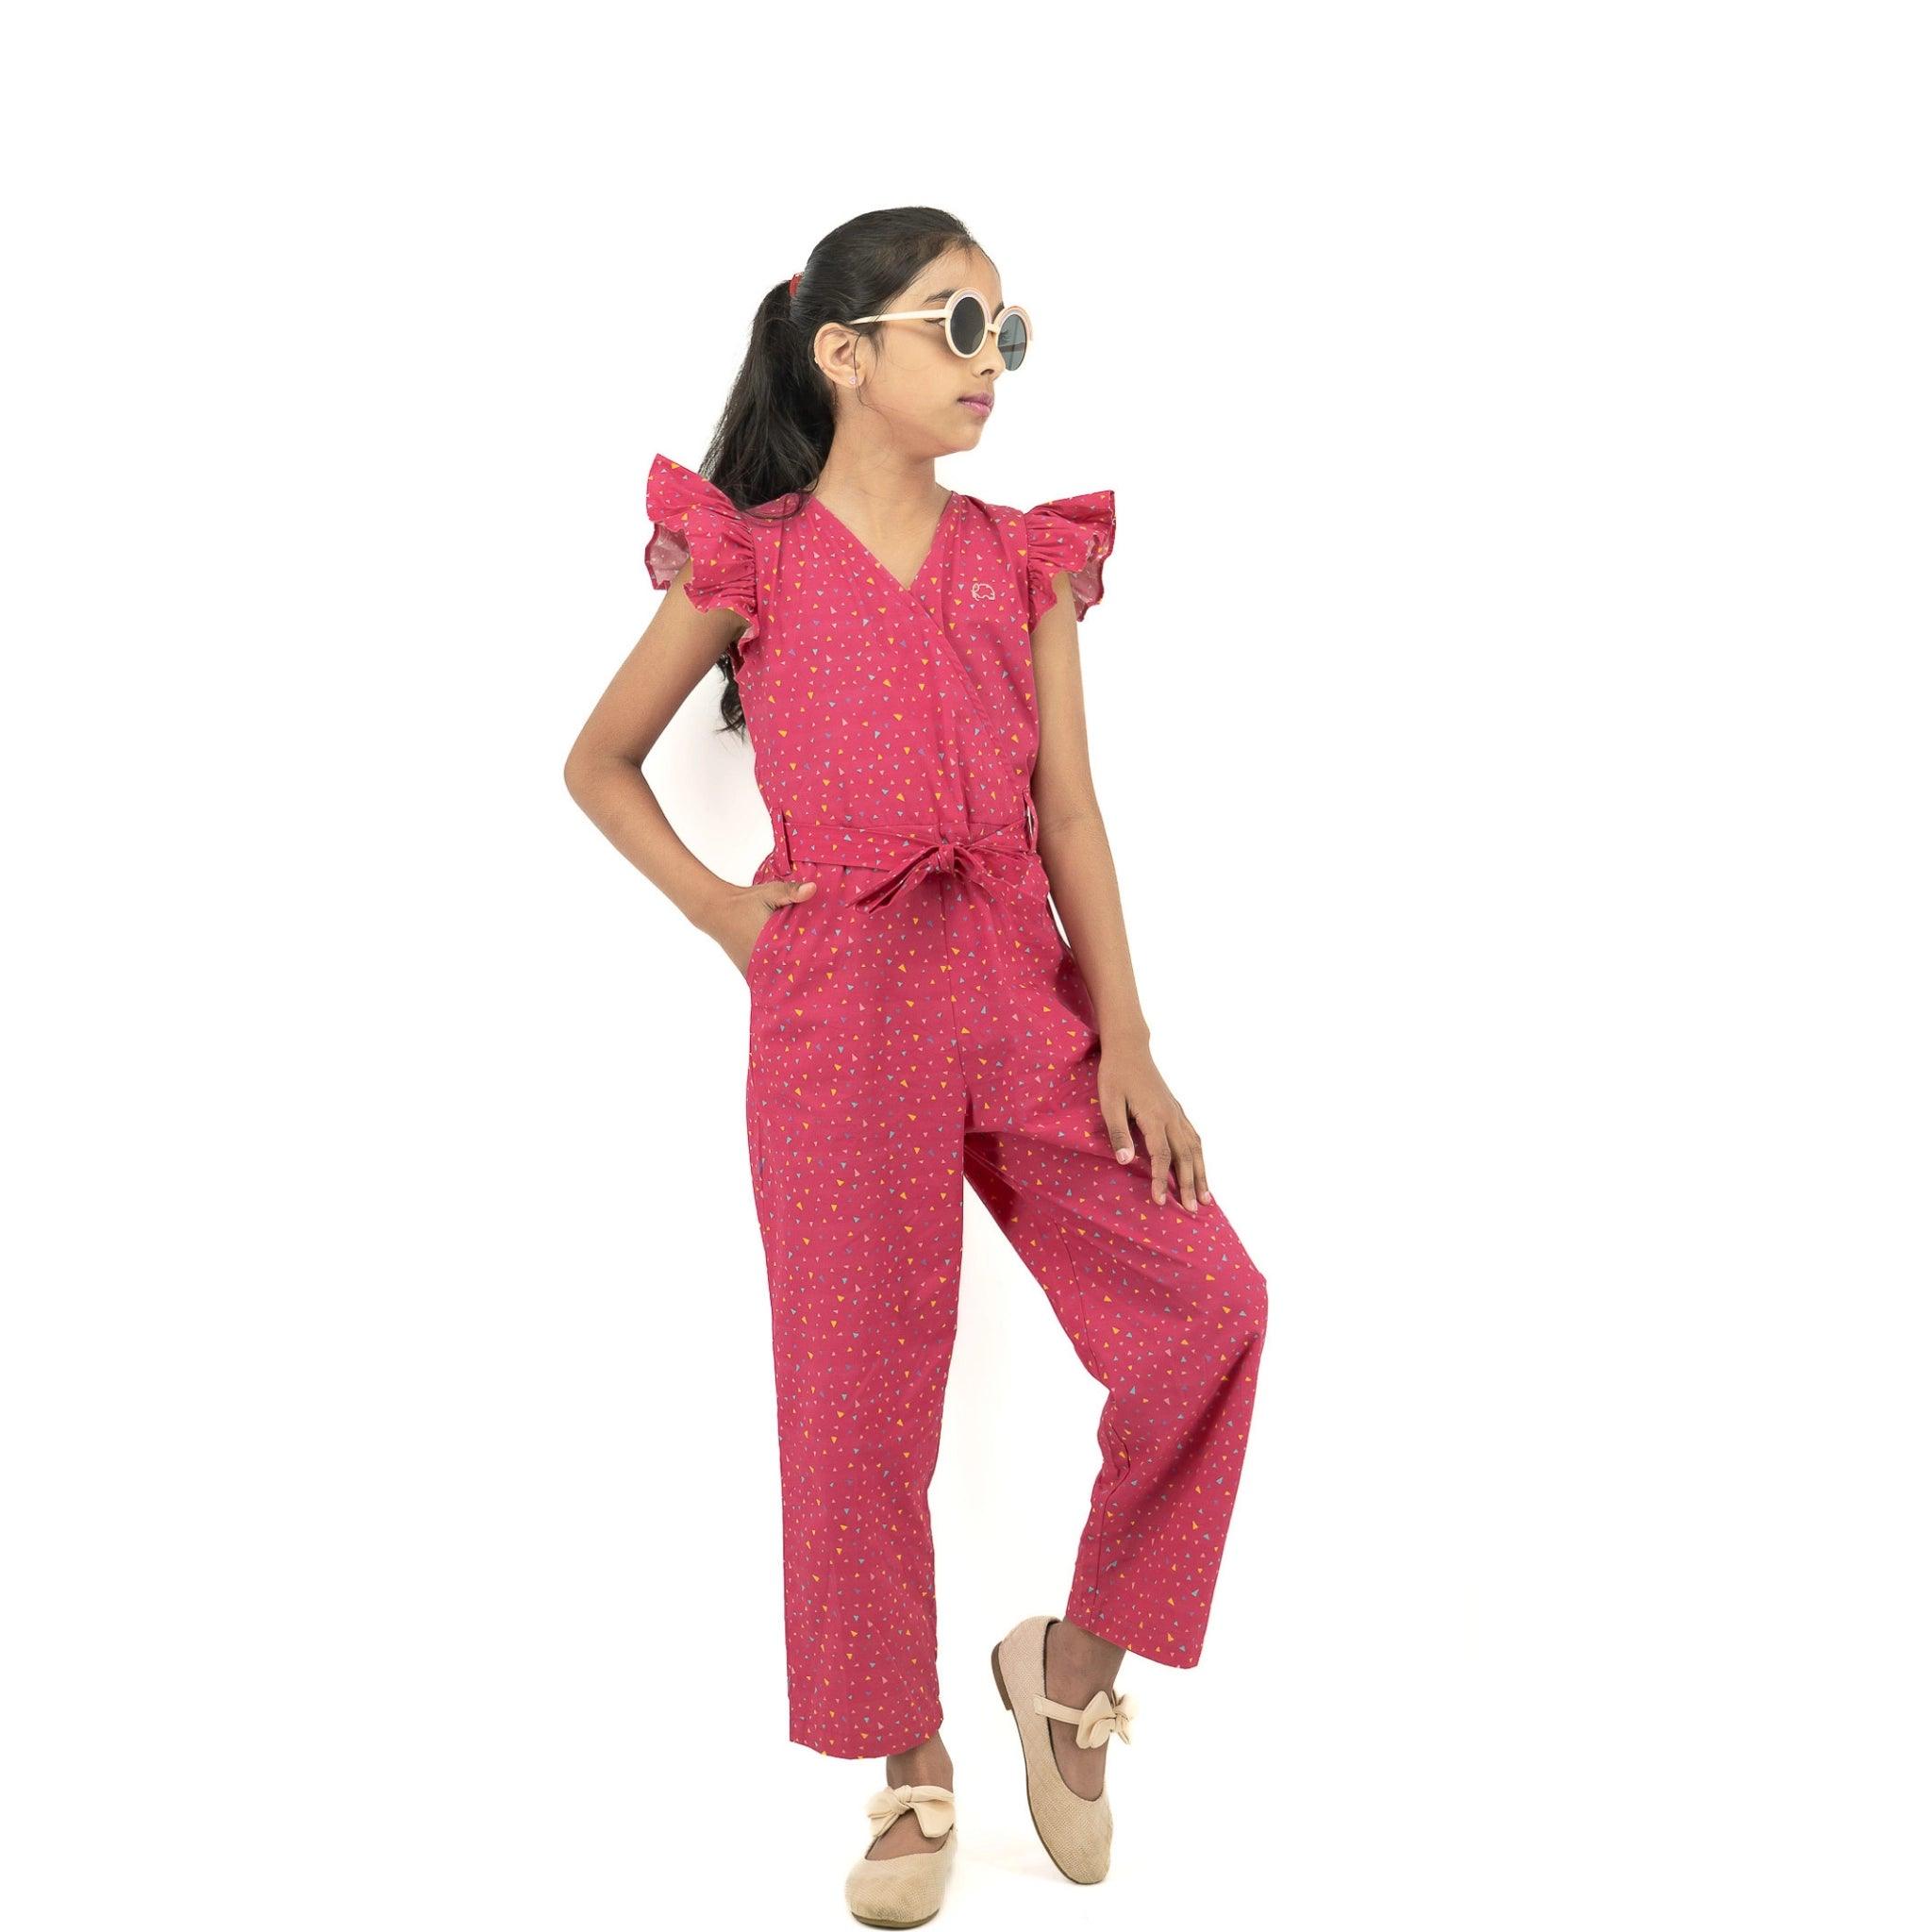 Young girl in a Red Rose cotton jumpsuit for girls by Karee and sunglasses, posing confidently with one hand on her hip, against a white background.